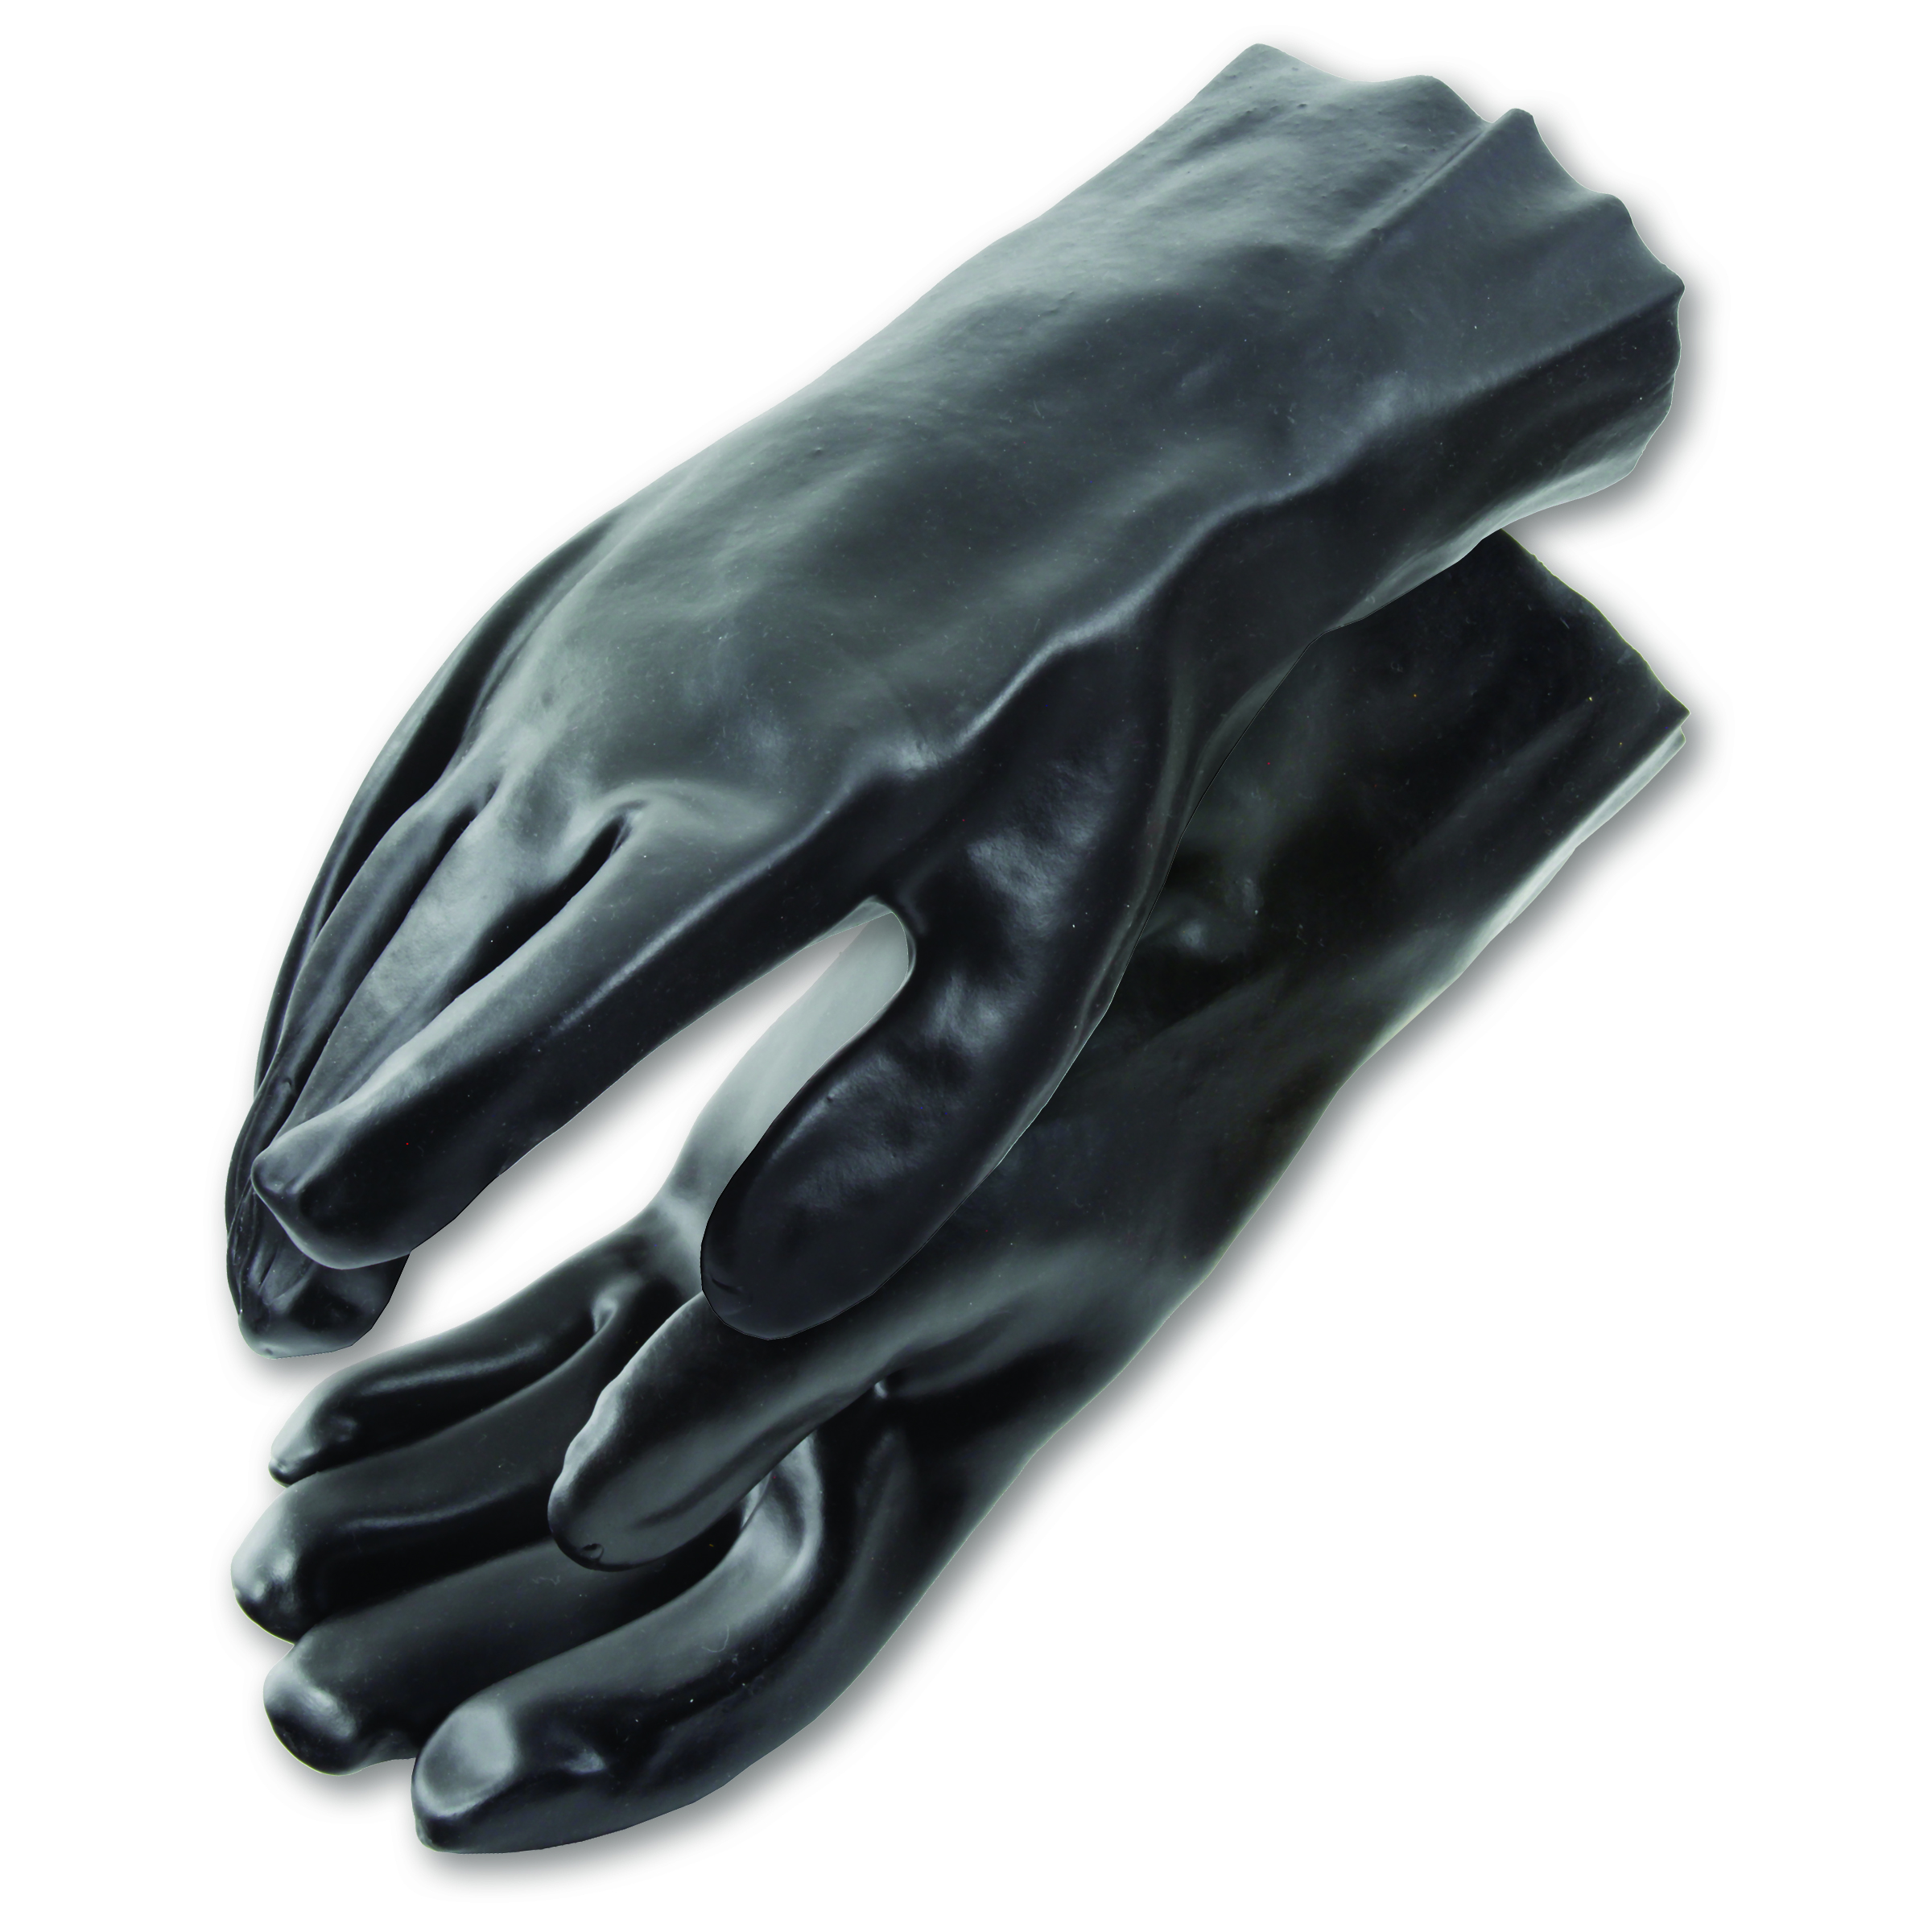 PVC Coated Gloves, 12 Inch, 1 Pair